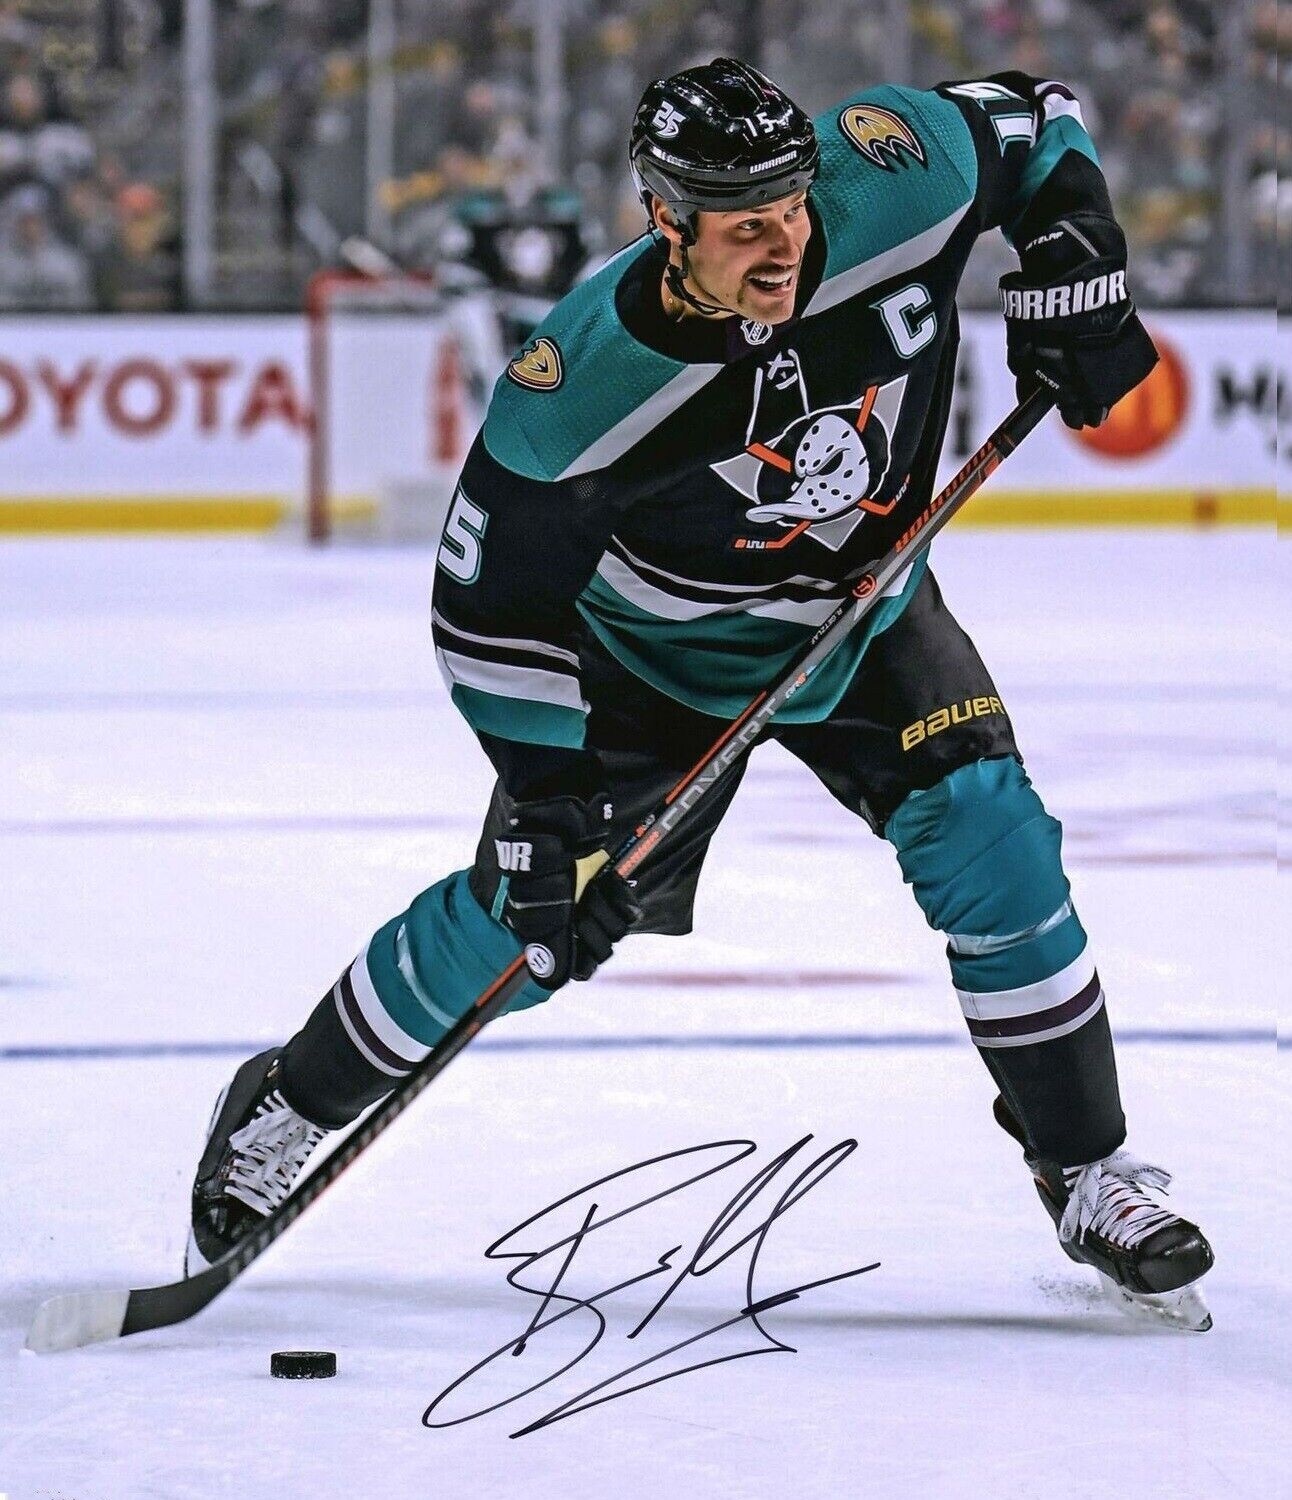 Ryan Getzlaf Autographed Signed 8x10 Photo Poster painting ( Ducks ) REPRINT